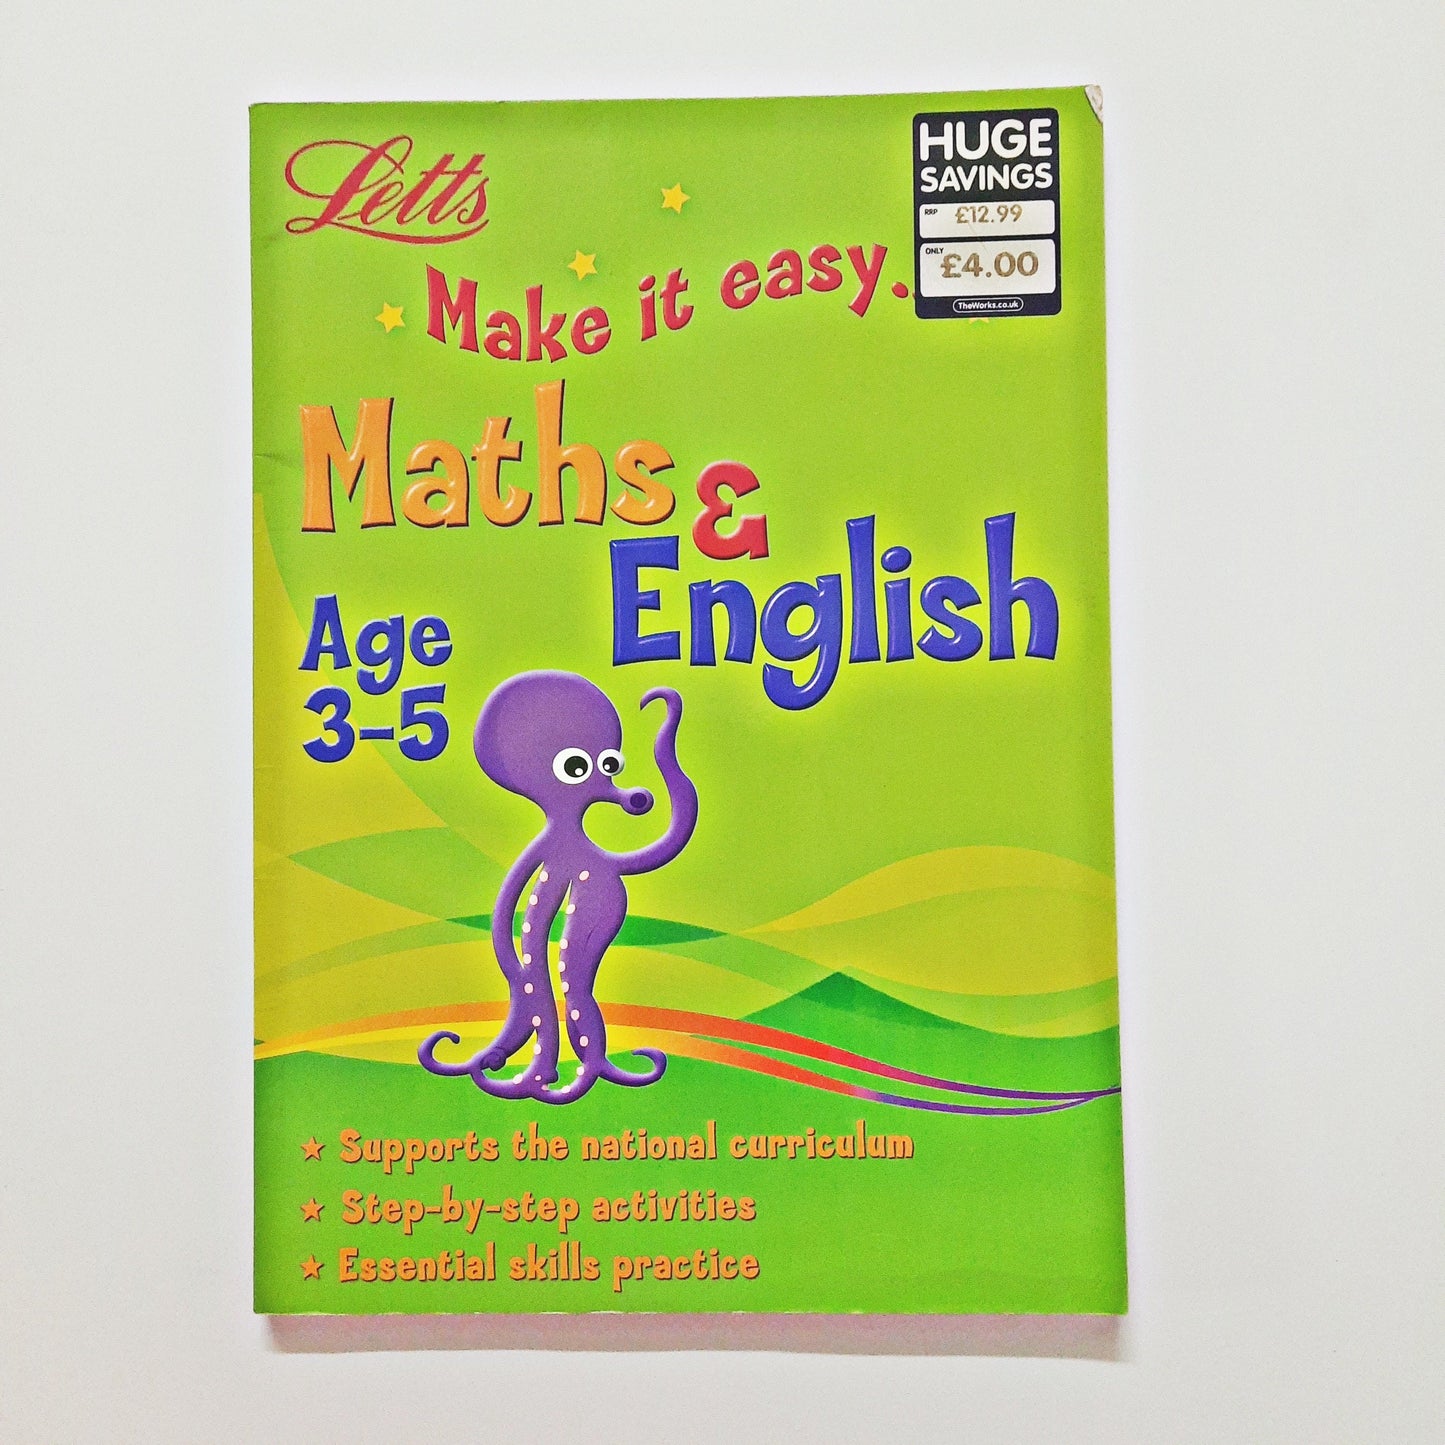 Make it easy - Maths and English